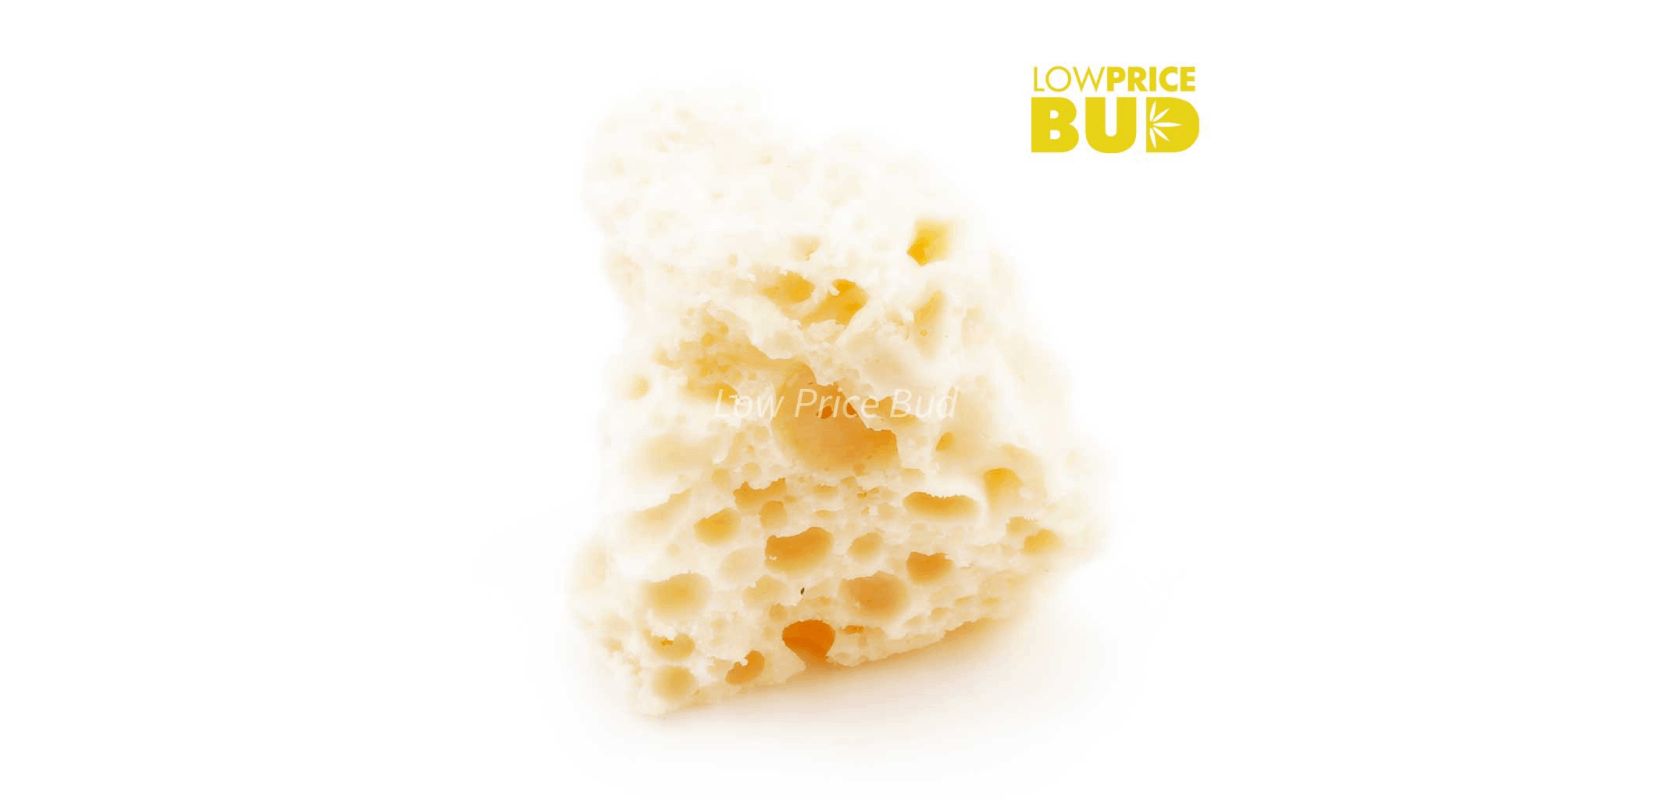 THC Crumble - Durban Poison lives up to the reputation of being one of the best and most effective cannabis concentrates available at Low Price Bud. 